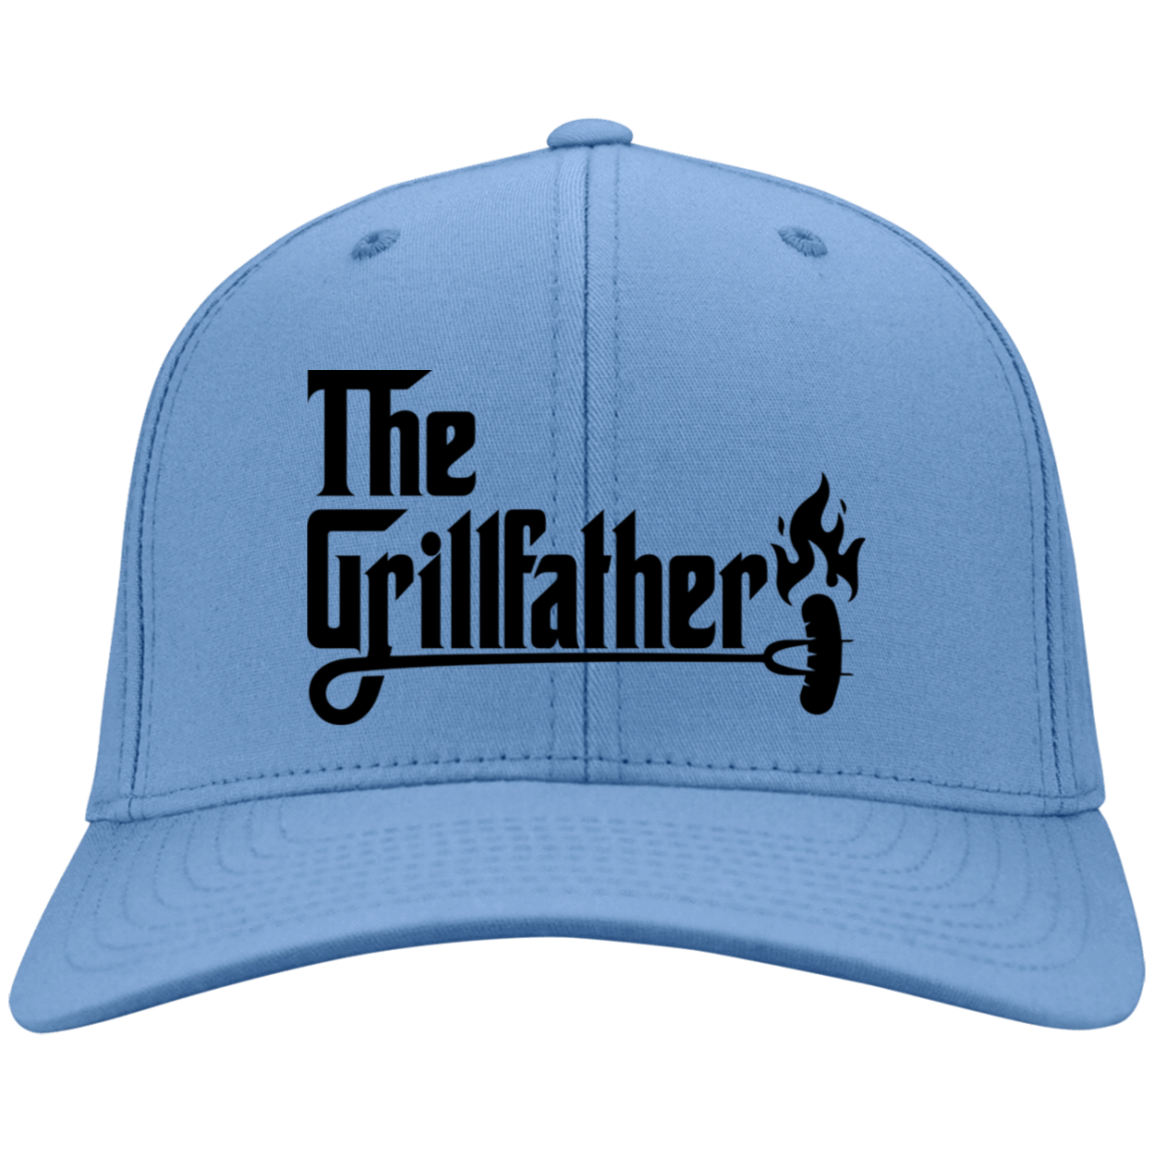 THE GRILLFATHER CAP